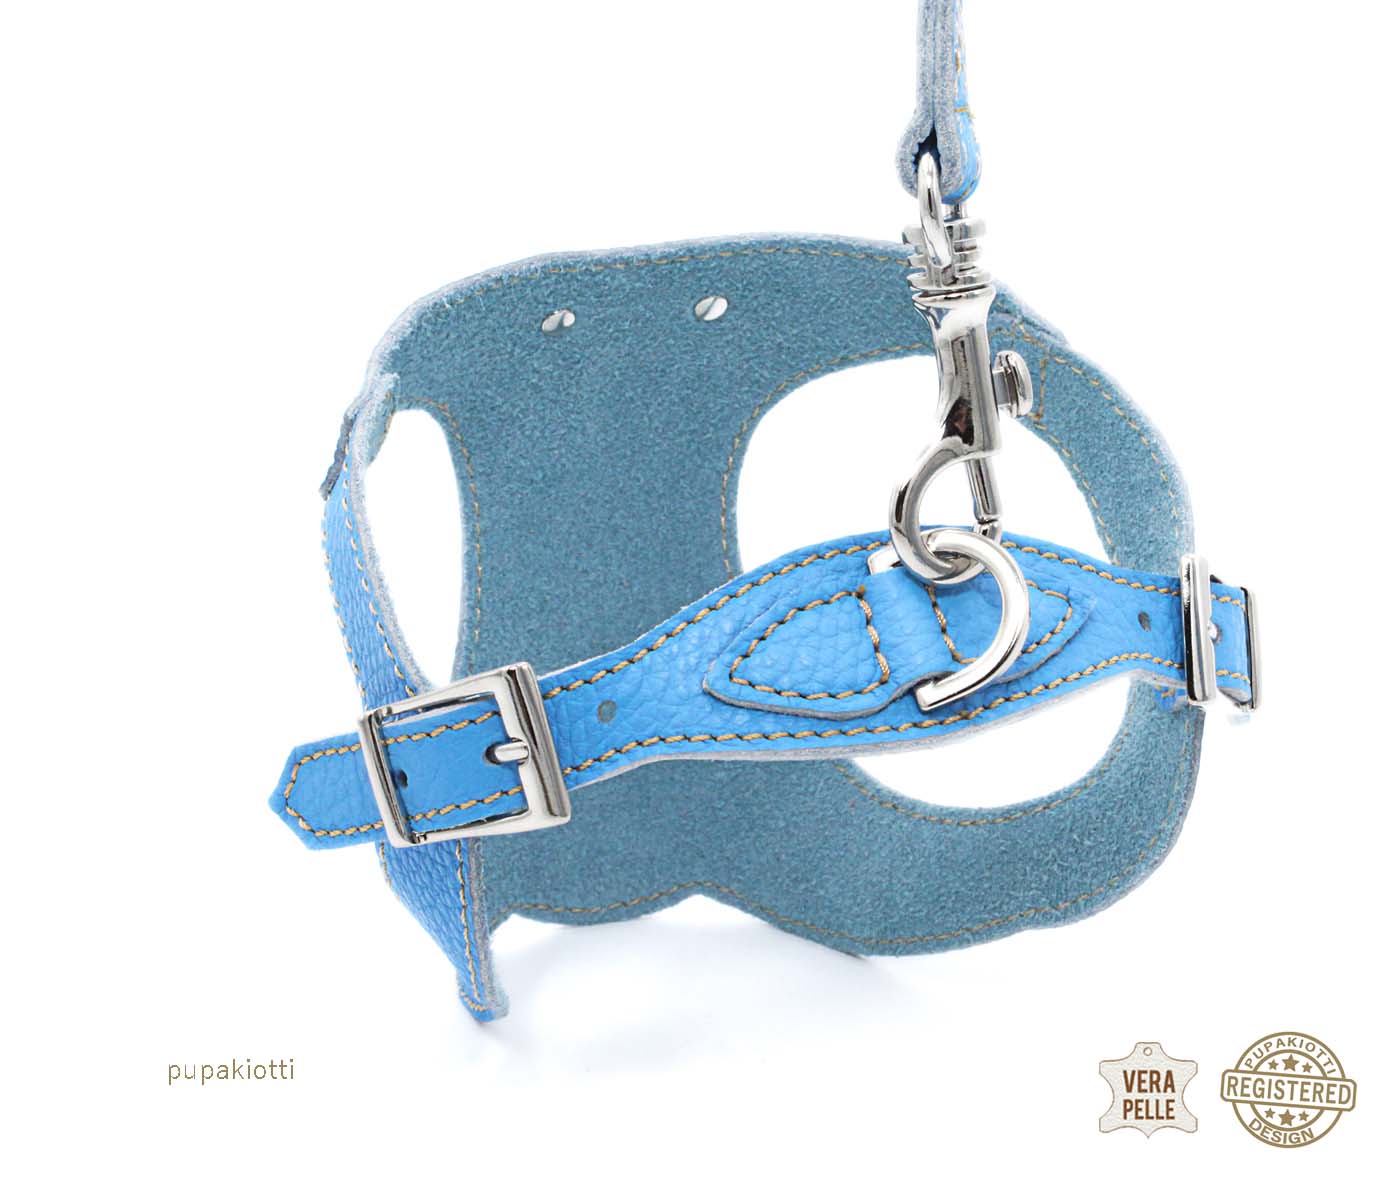 Basic. Ergonomic and adjustable leather harness for dogs